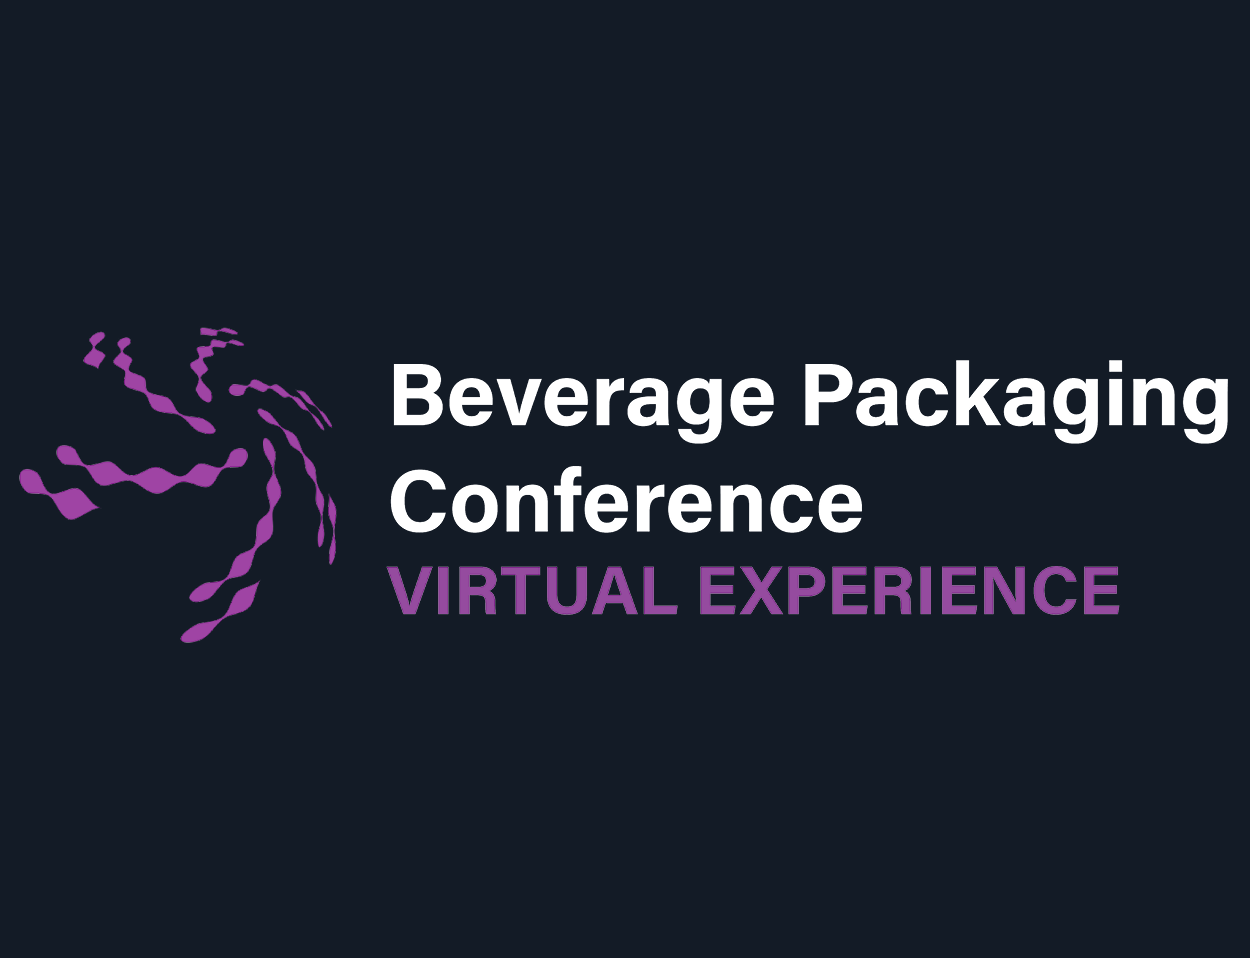 Beverage Packaging Conference – A Virtual Experience